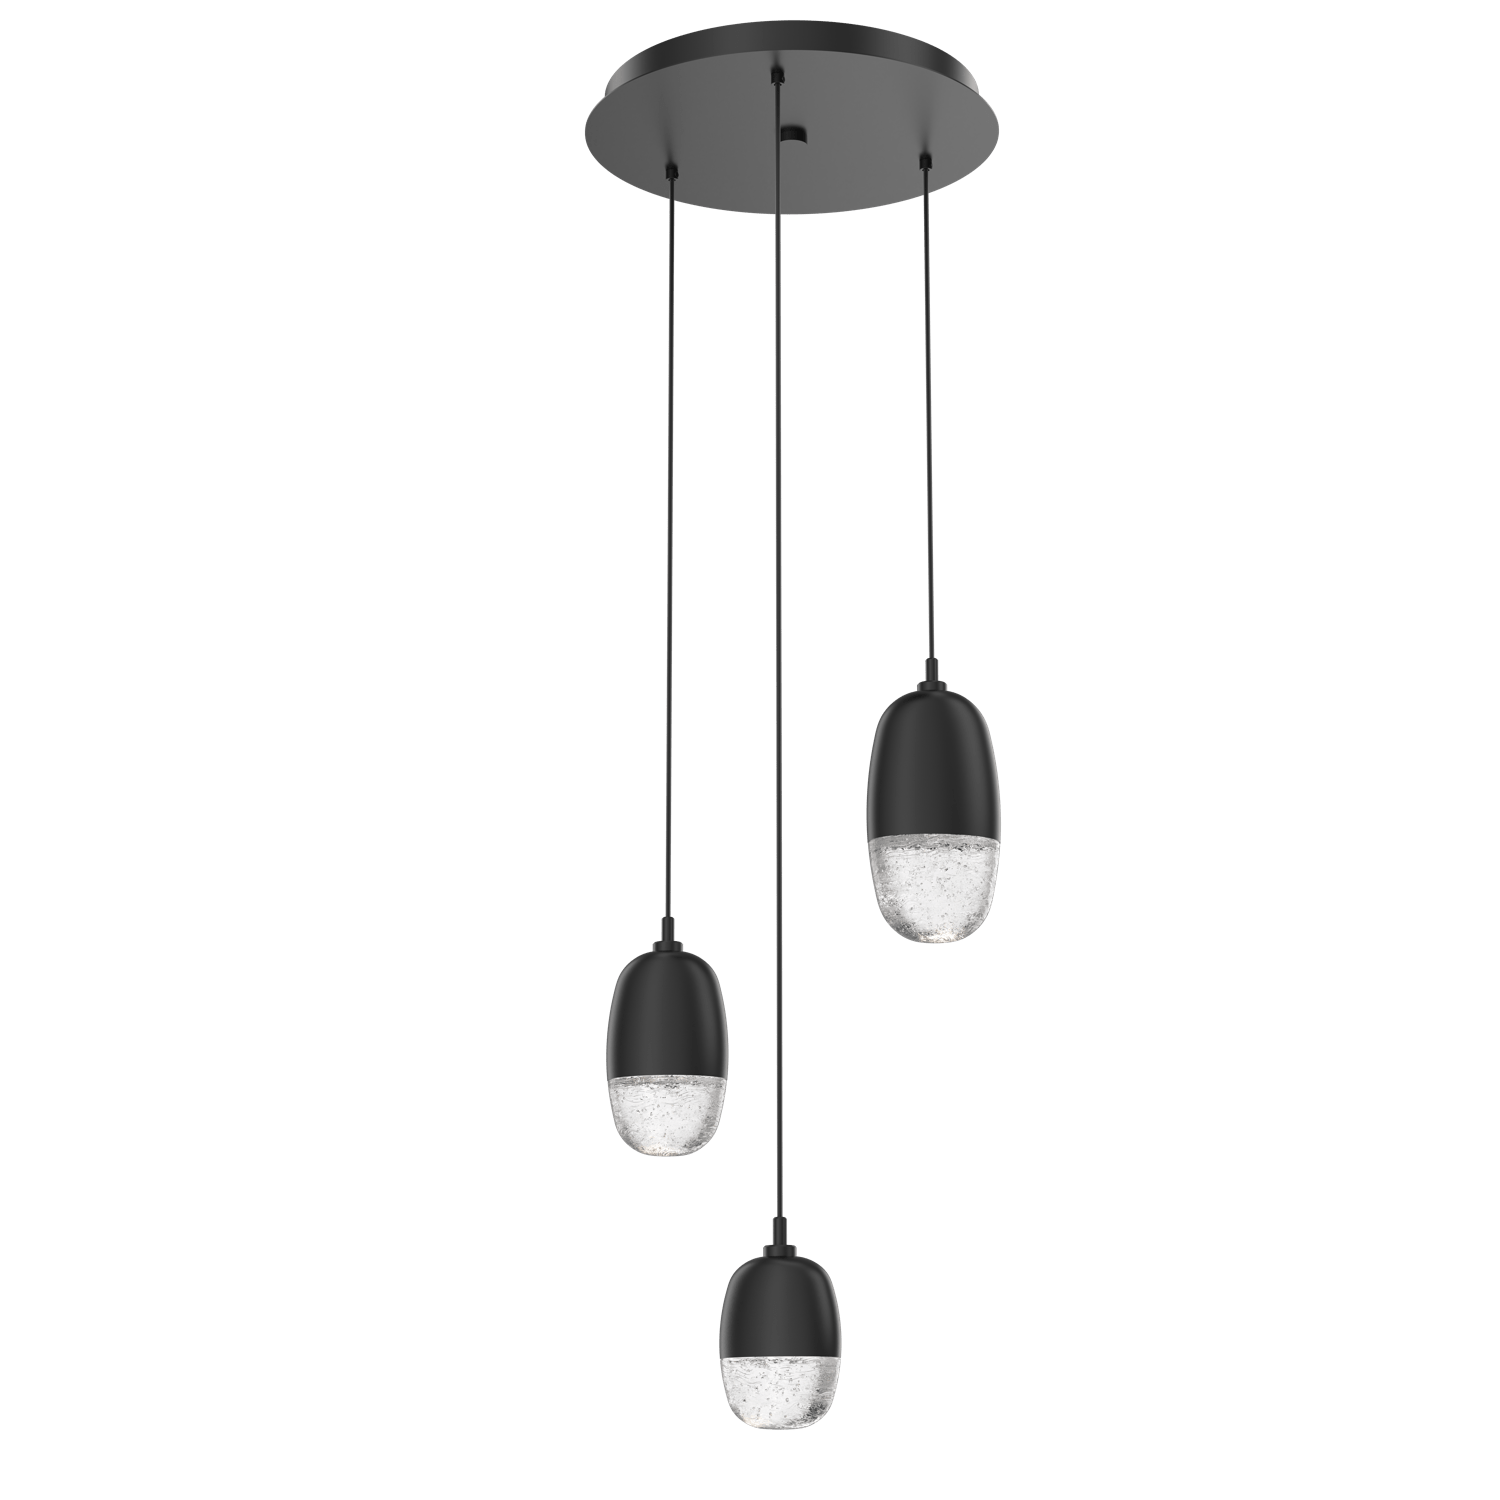 CHB0079-03-MB-Hammerton-Studio-Pebble-3-light-round-pendant-chandelier-with-matte-black-finish-and-clear-cast-glass-shades-and-LED-lamping